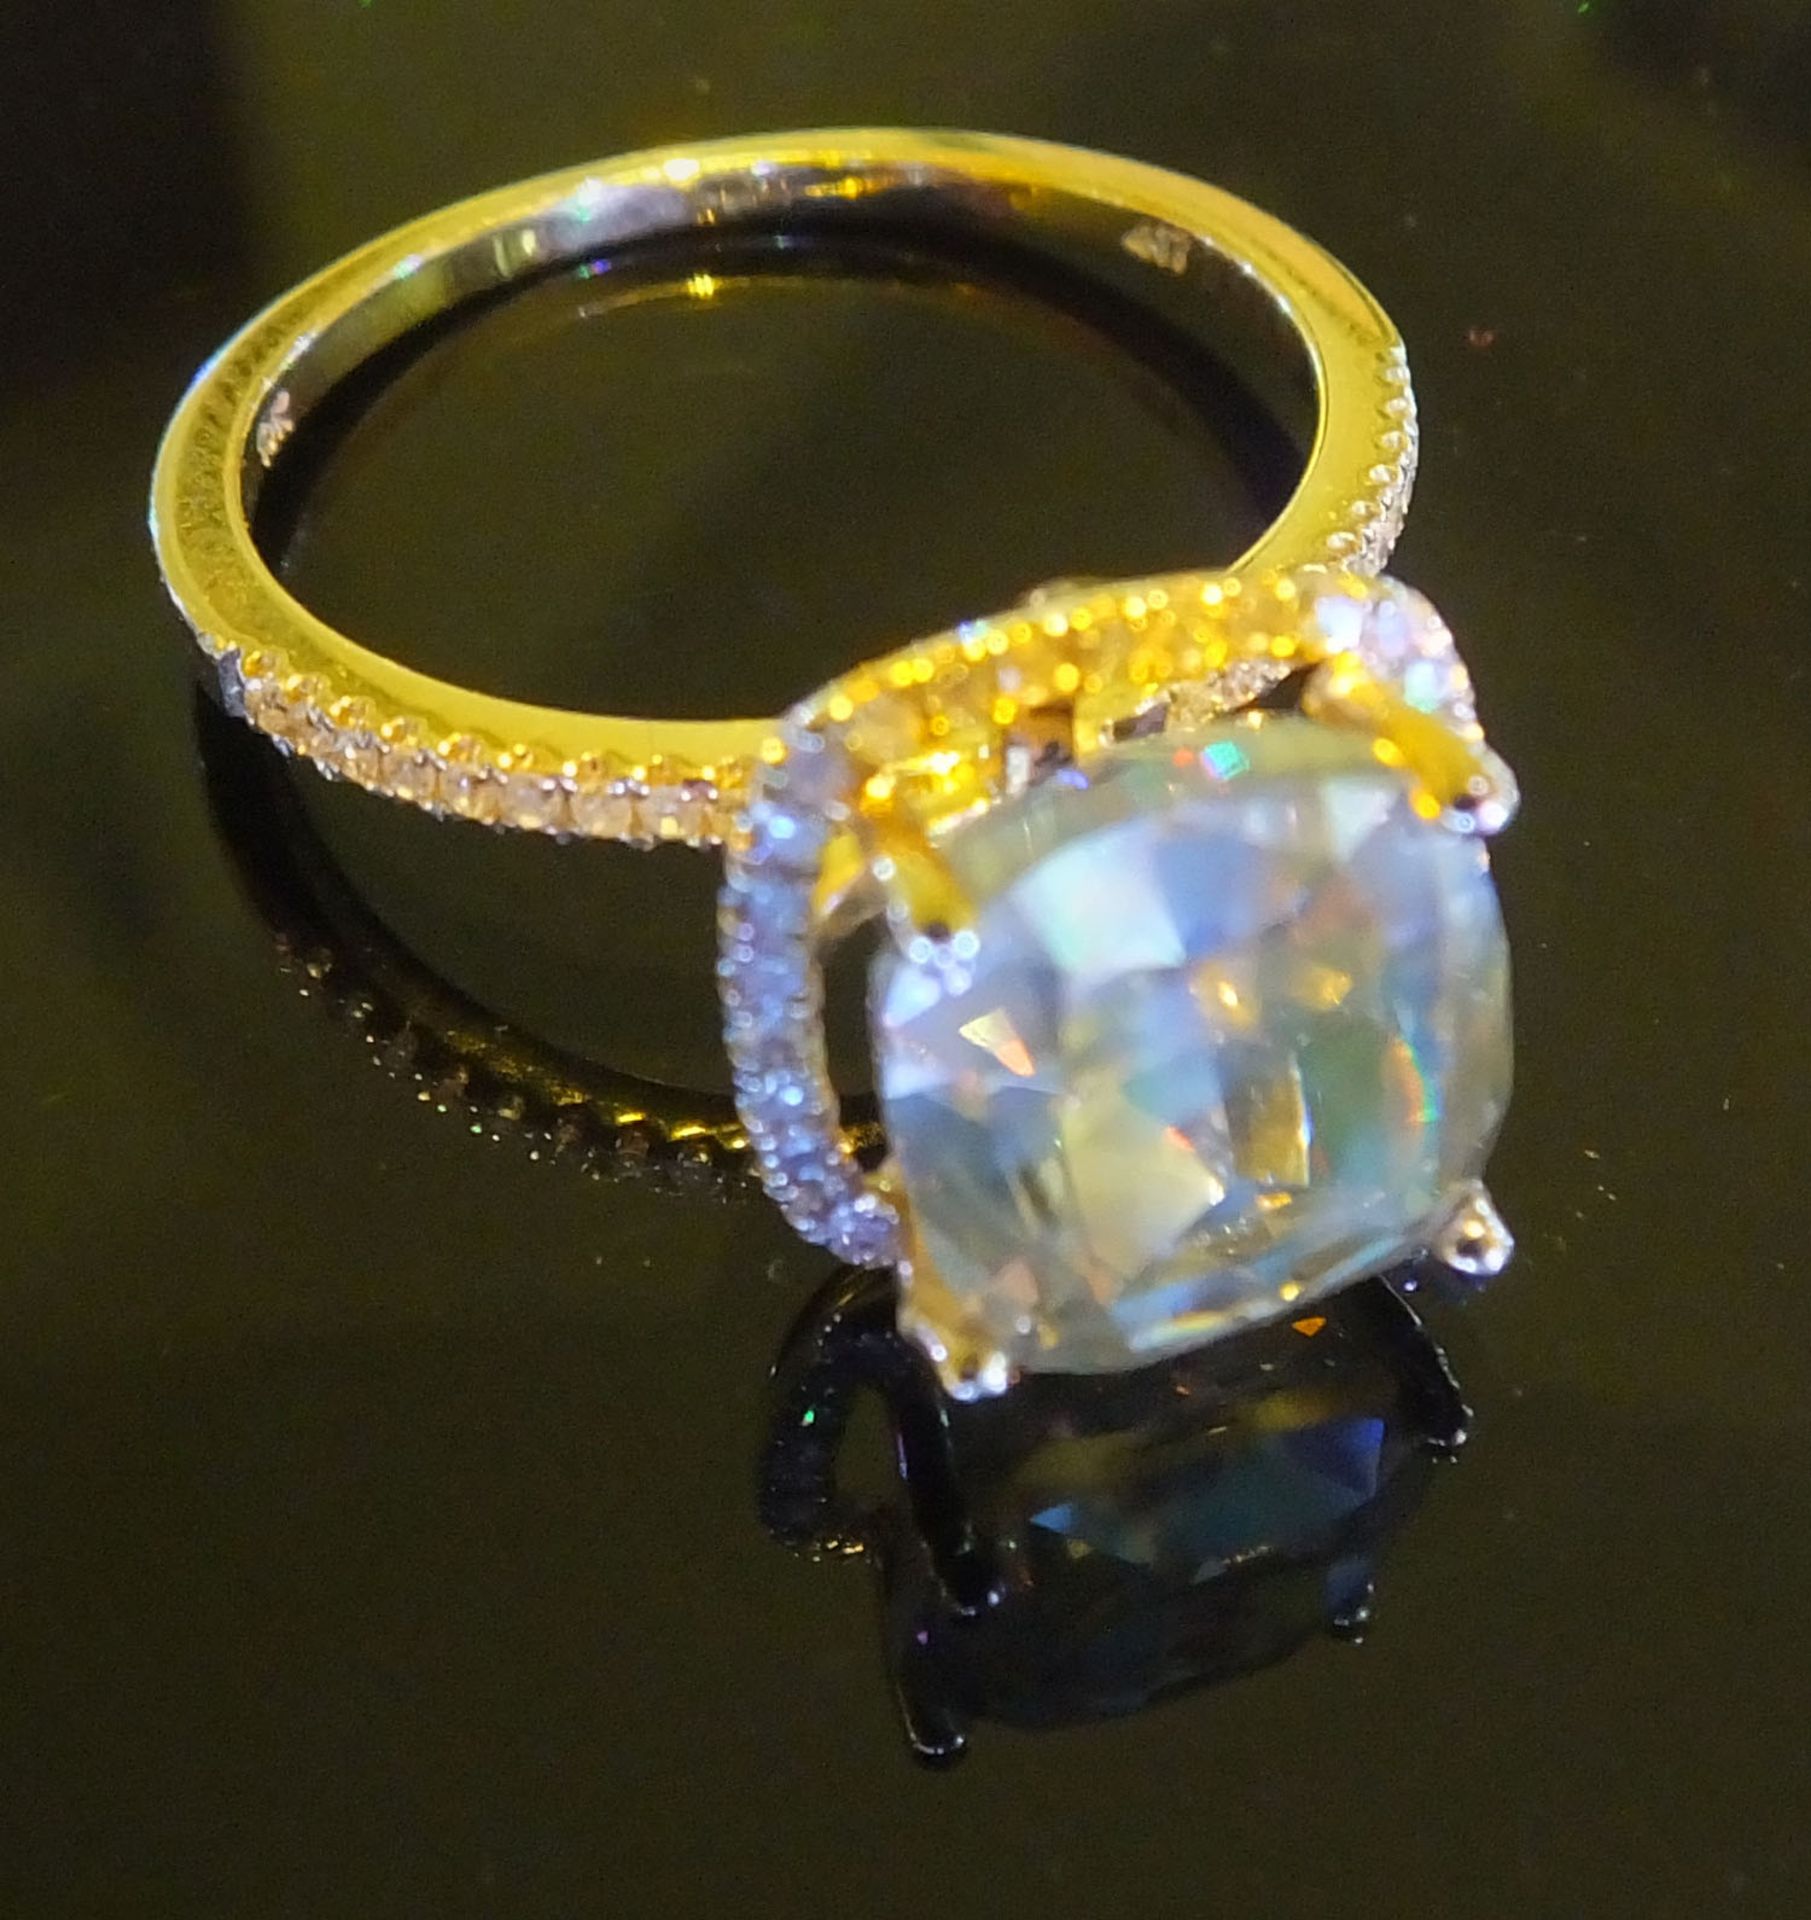 A 4.06 carat Cushion cut diamond, set in yellow gold Halo setting surrounded by diamonds.